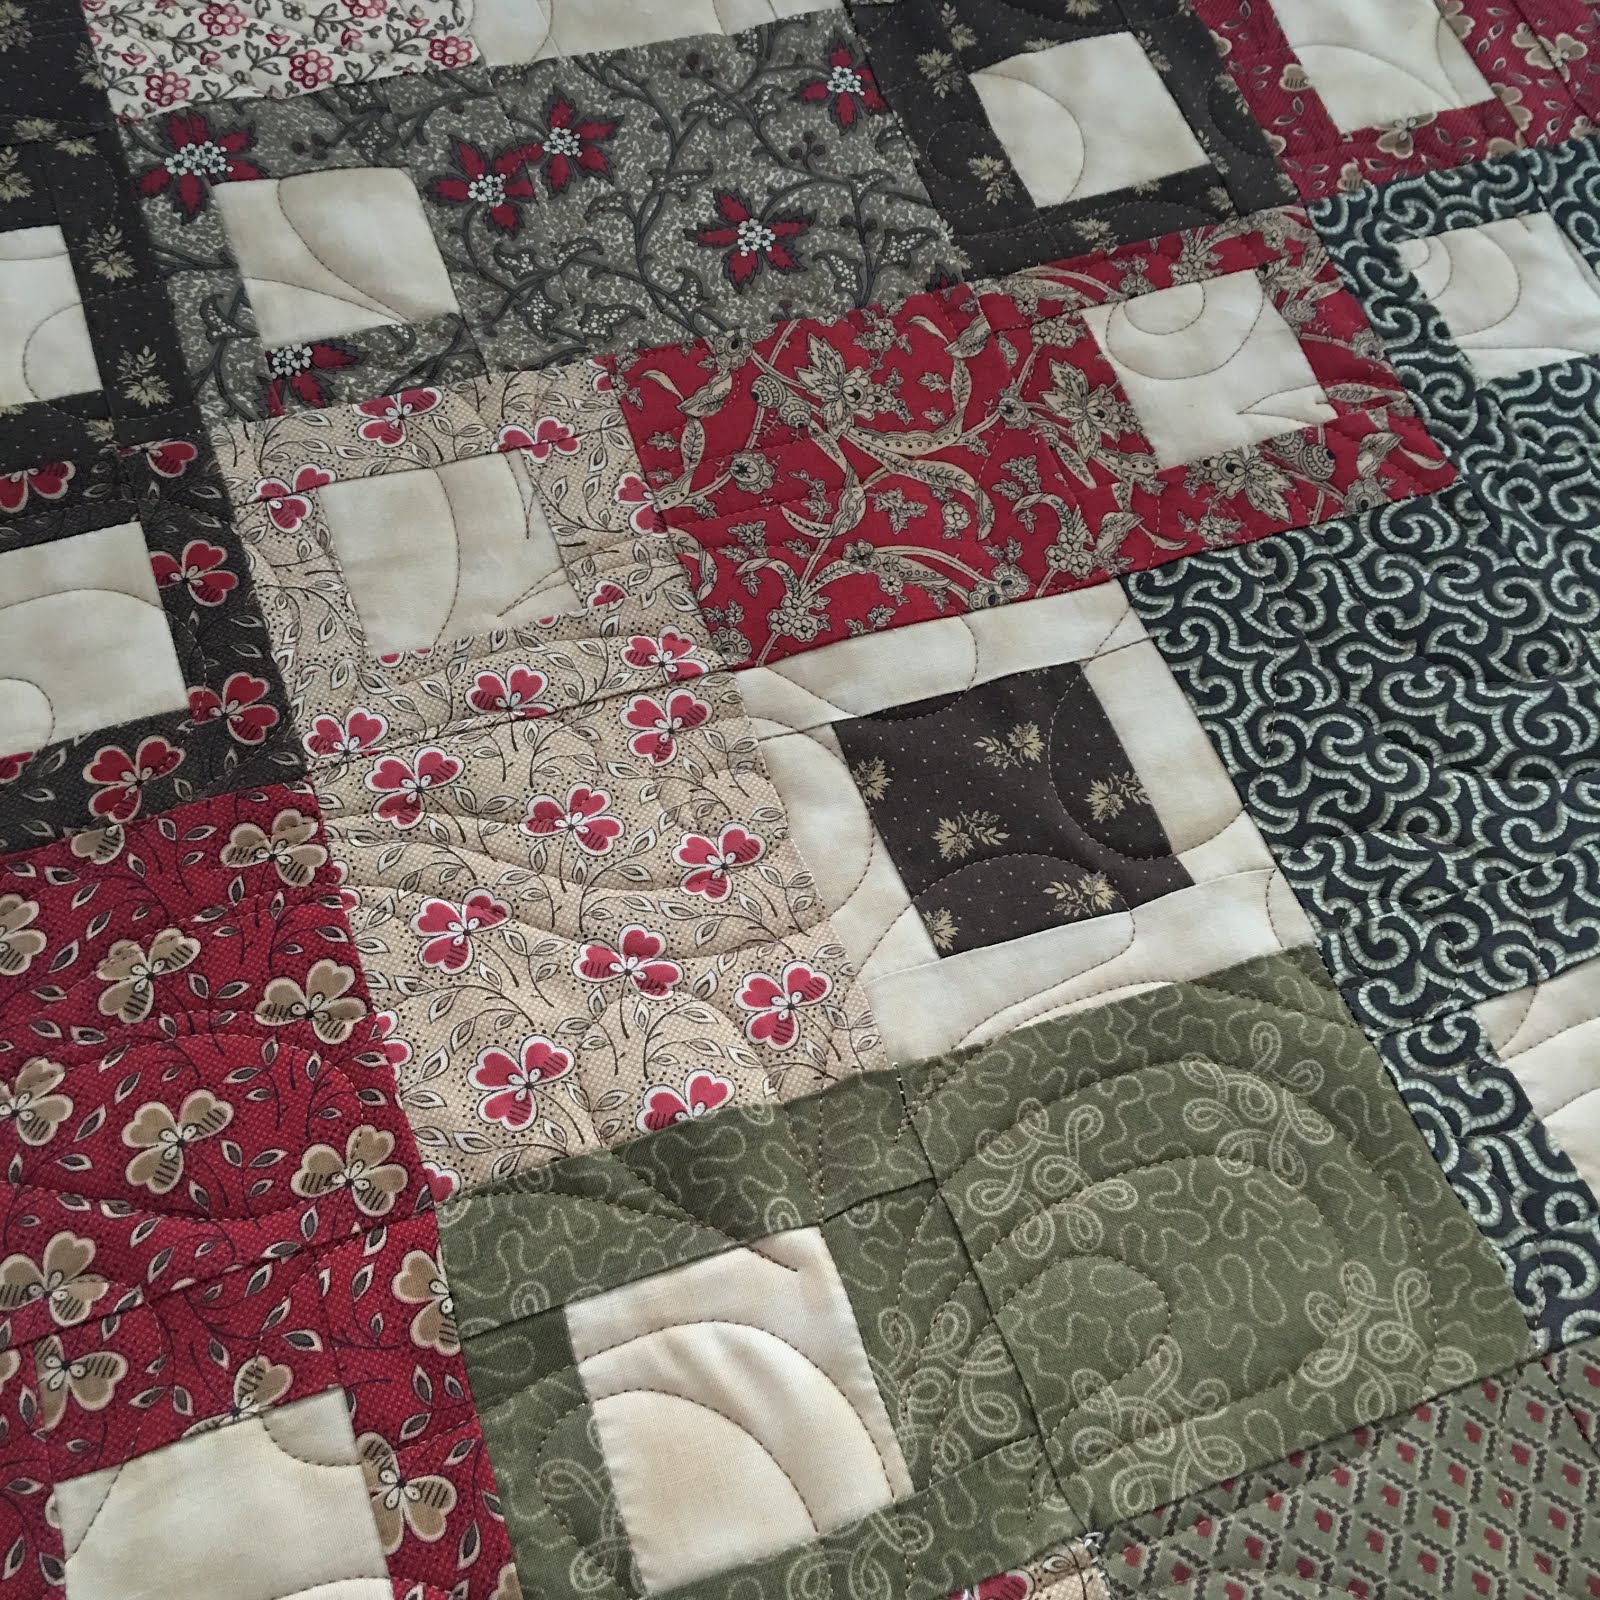 Grace and Peace Quilting: 📢 Client Show & Tell 📢